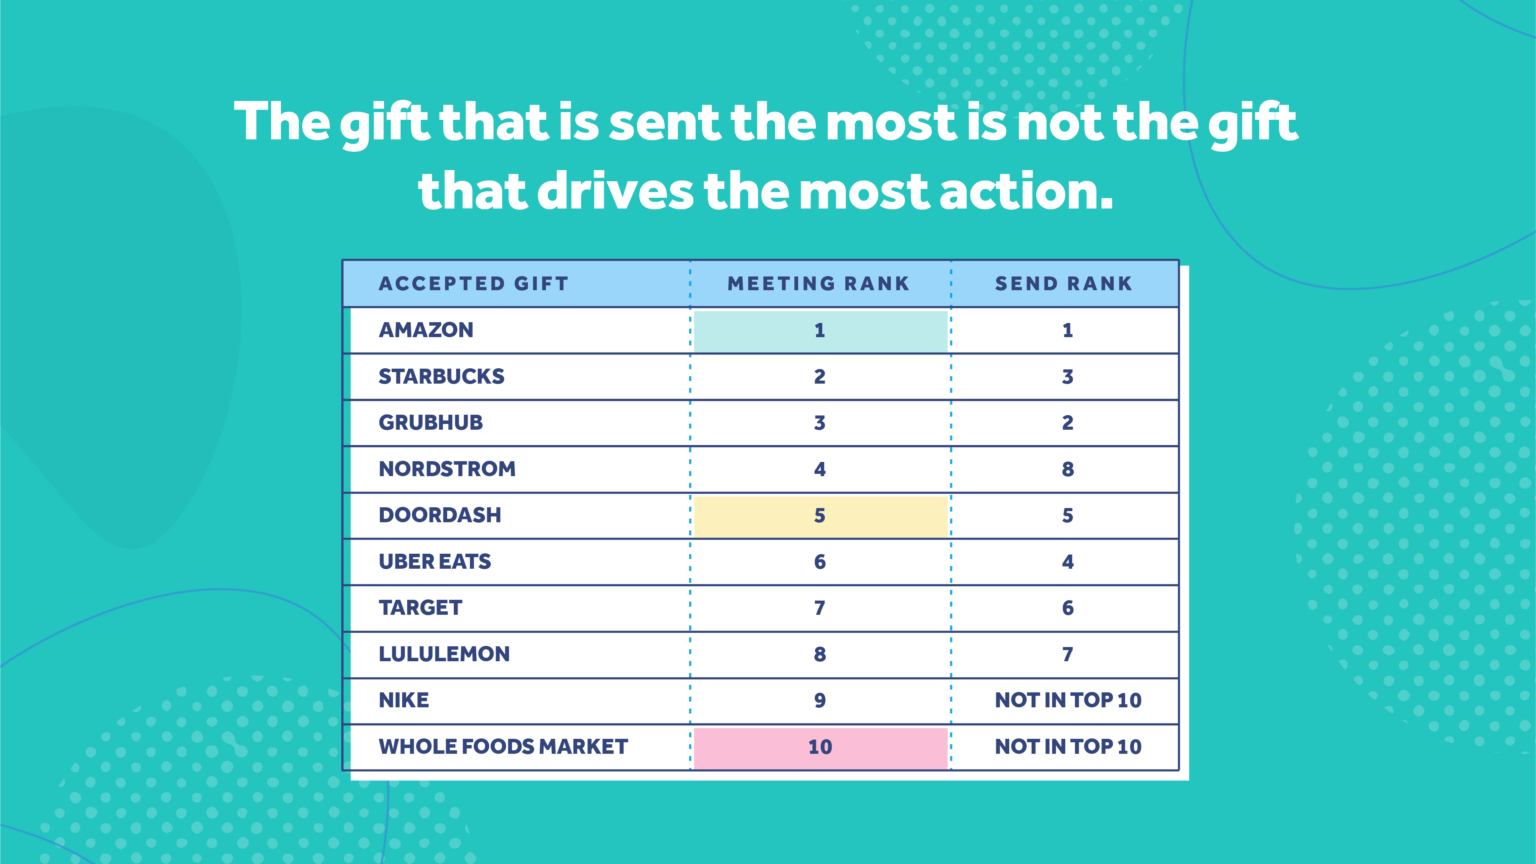 Chart showing accepted gifts versus their meeting and send ranks